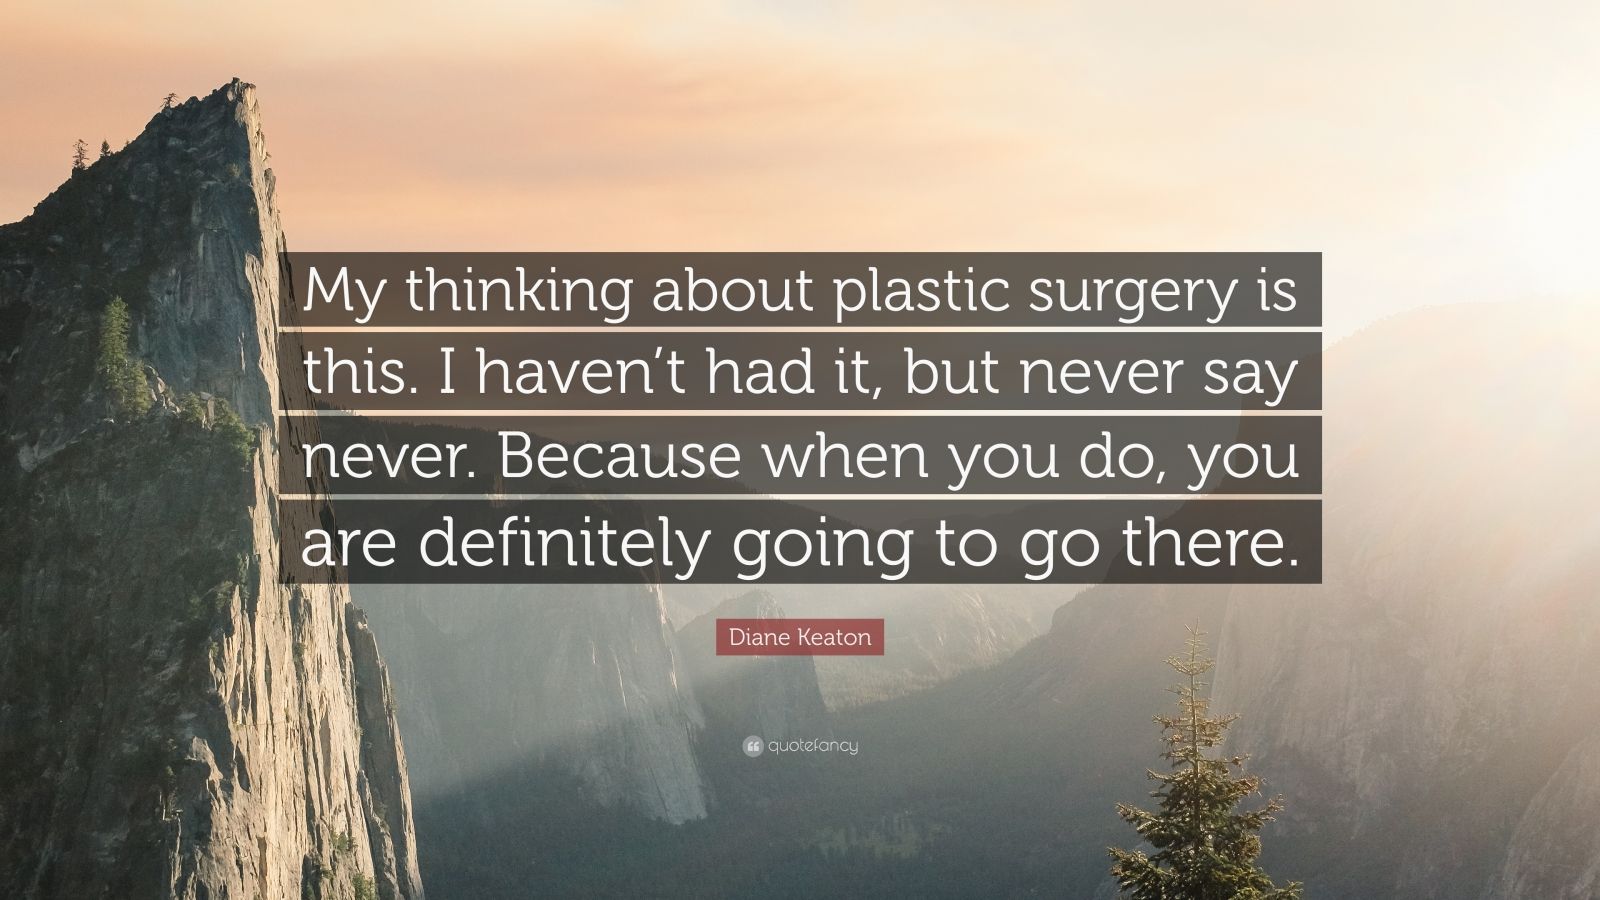 Diane Keaton Quote “My thinking about plastic surgery is